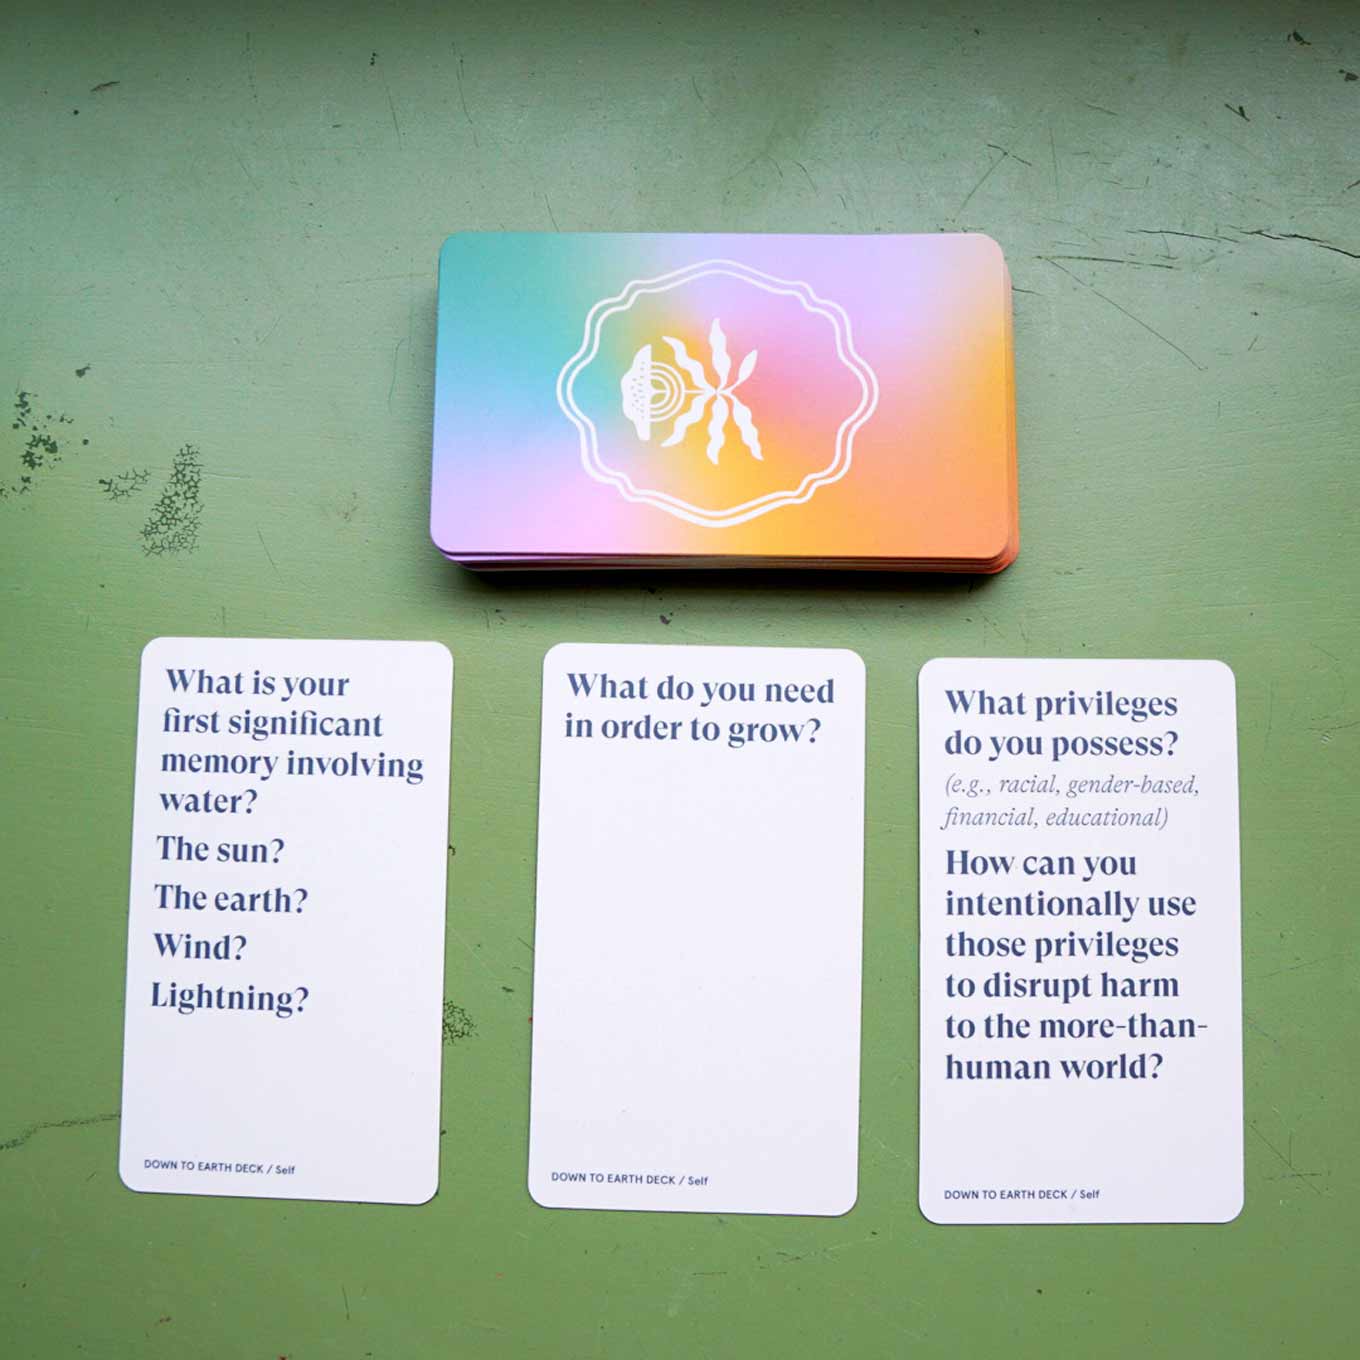 Cards saying: 1. What is your first significant memory involving water? 2. What do you need in order to grow? 3. What privileges do you possess? How can you intentionally use those privileges to disrupt harm to the more-than-human world?